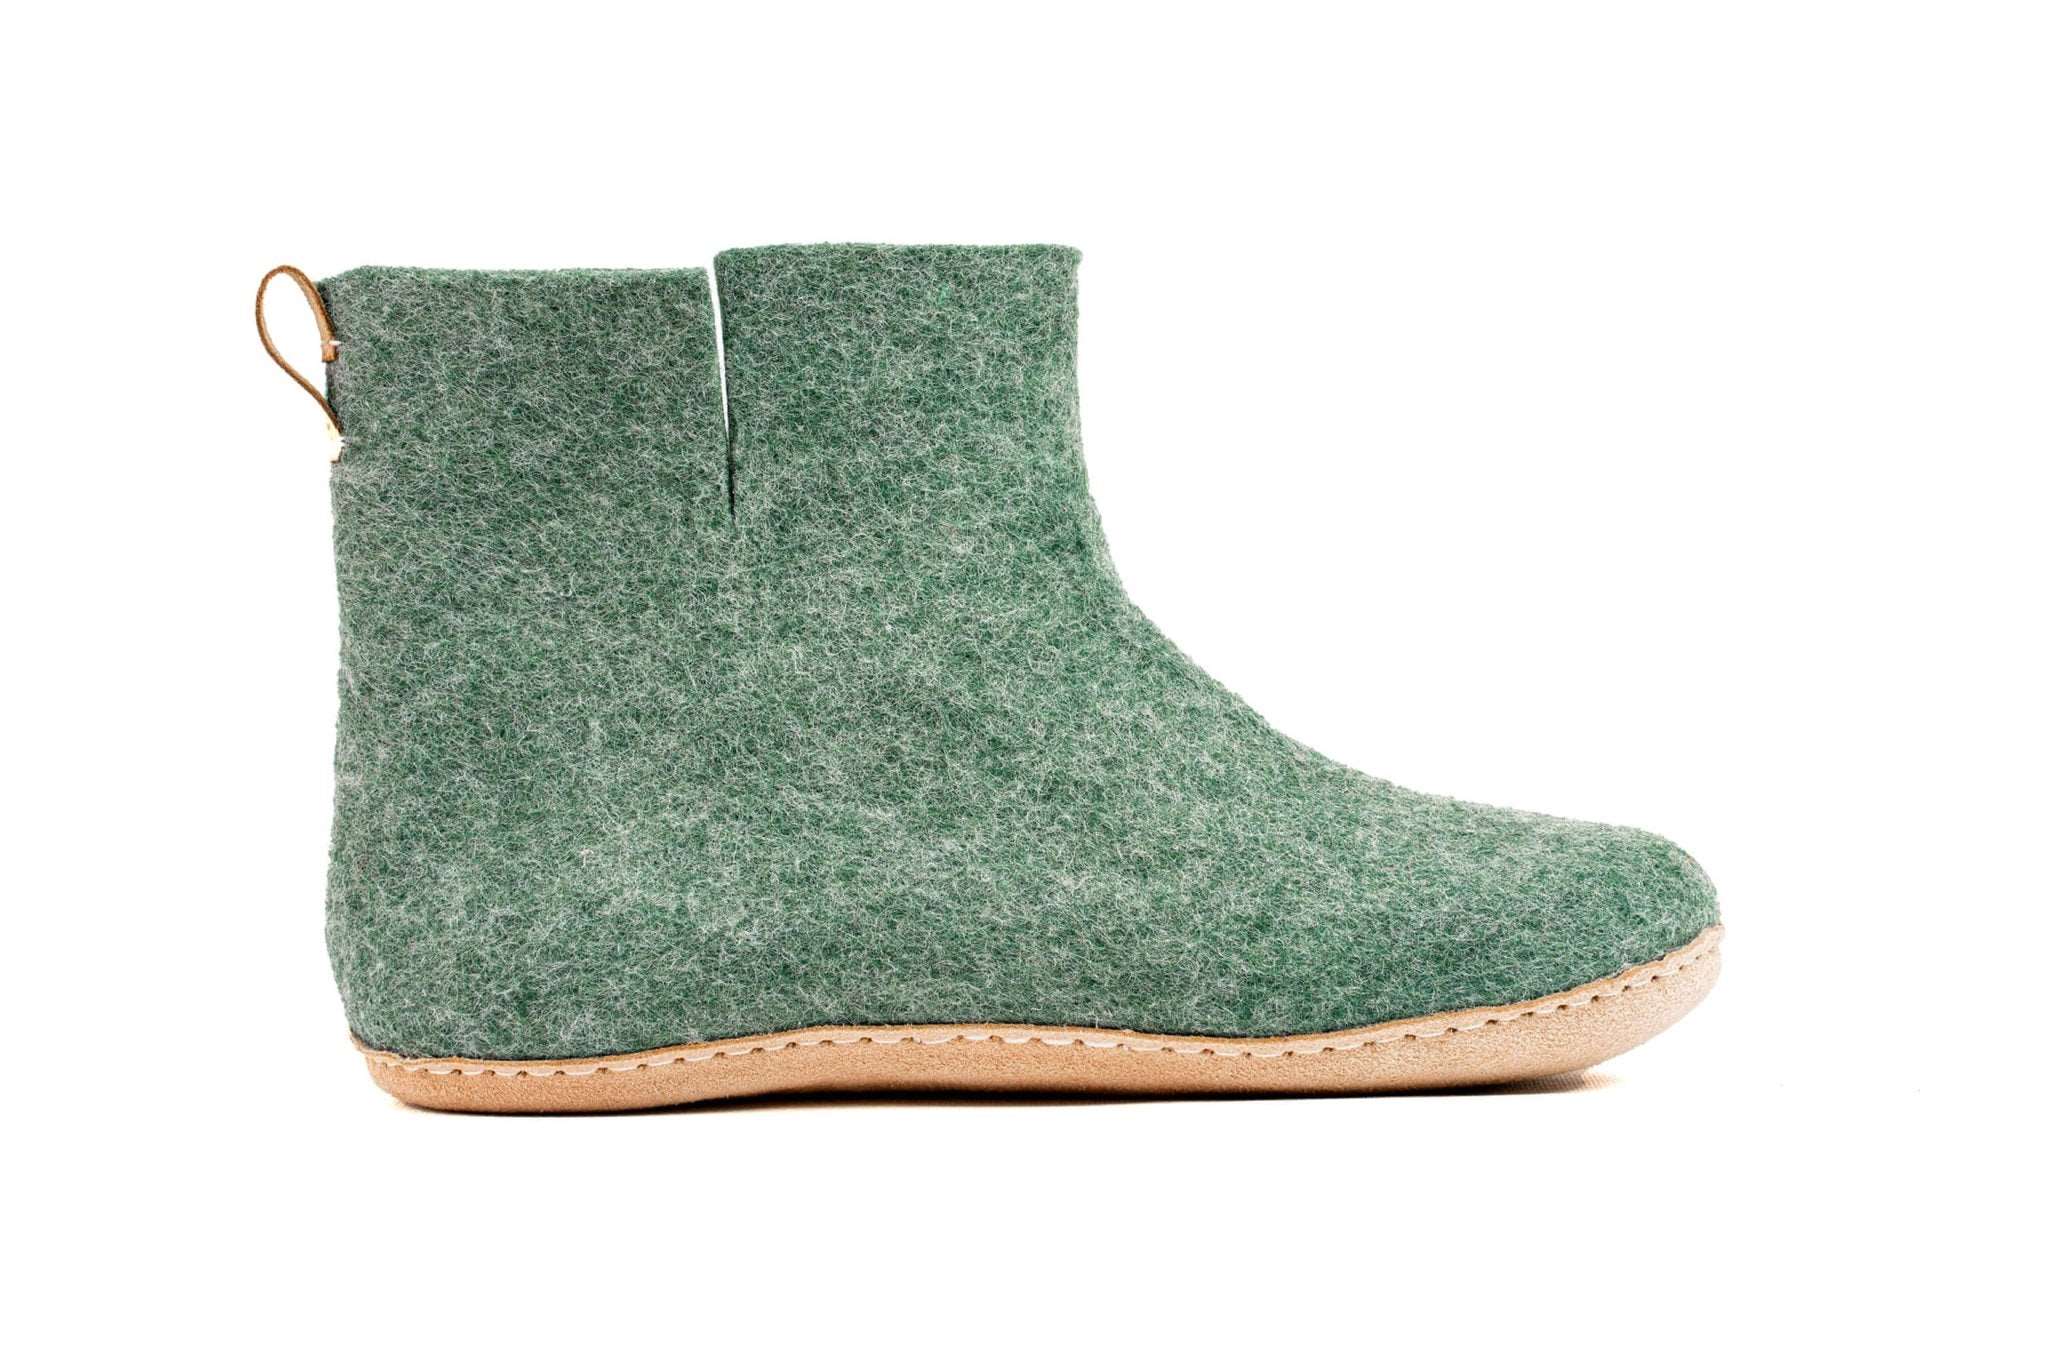 Indoor Boots With Leather Sole - Jungle Green - Woollyes